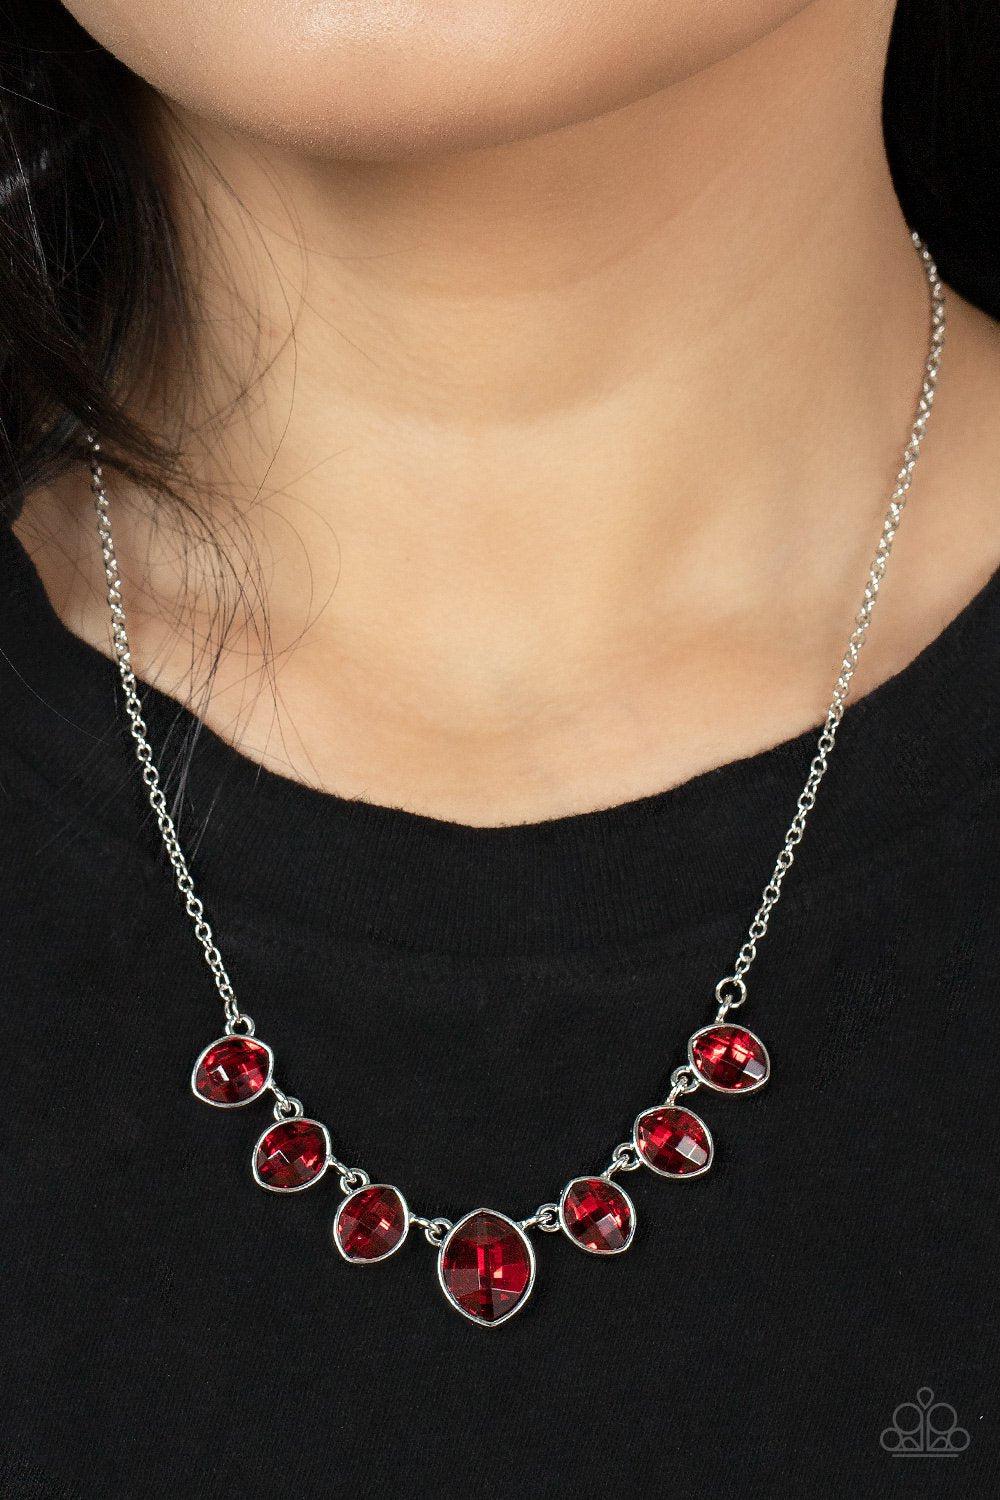 Material Girl Glamour Red Rhinestone Necklace - Paparazzi Accessories- model - CarasShop.com - $5 Jewelry by Cara Jewels